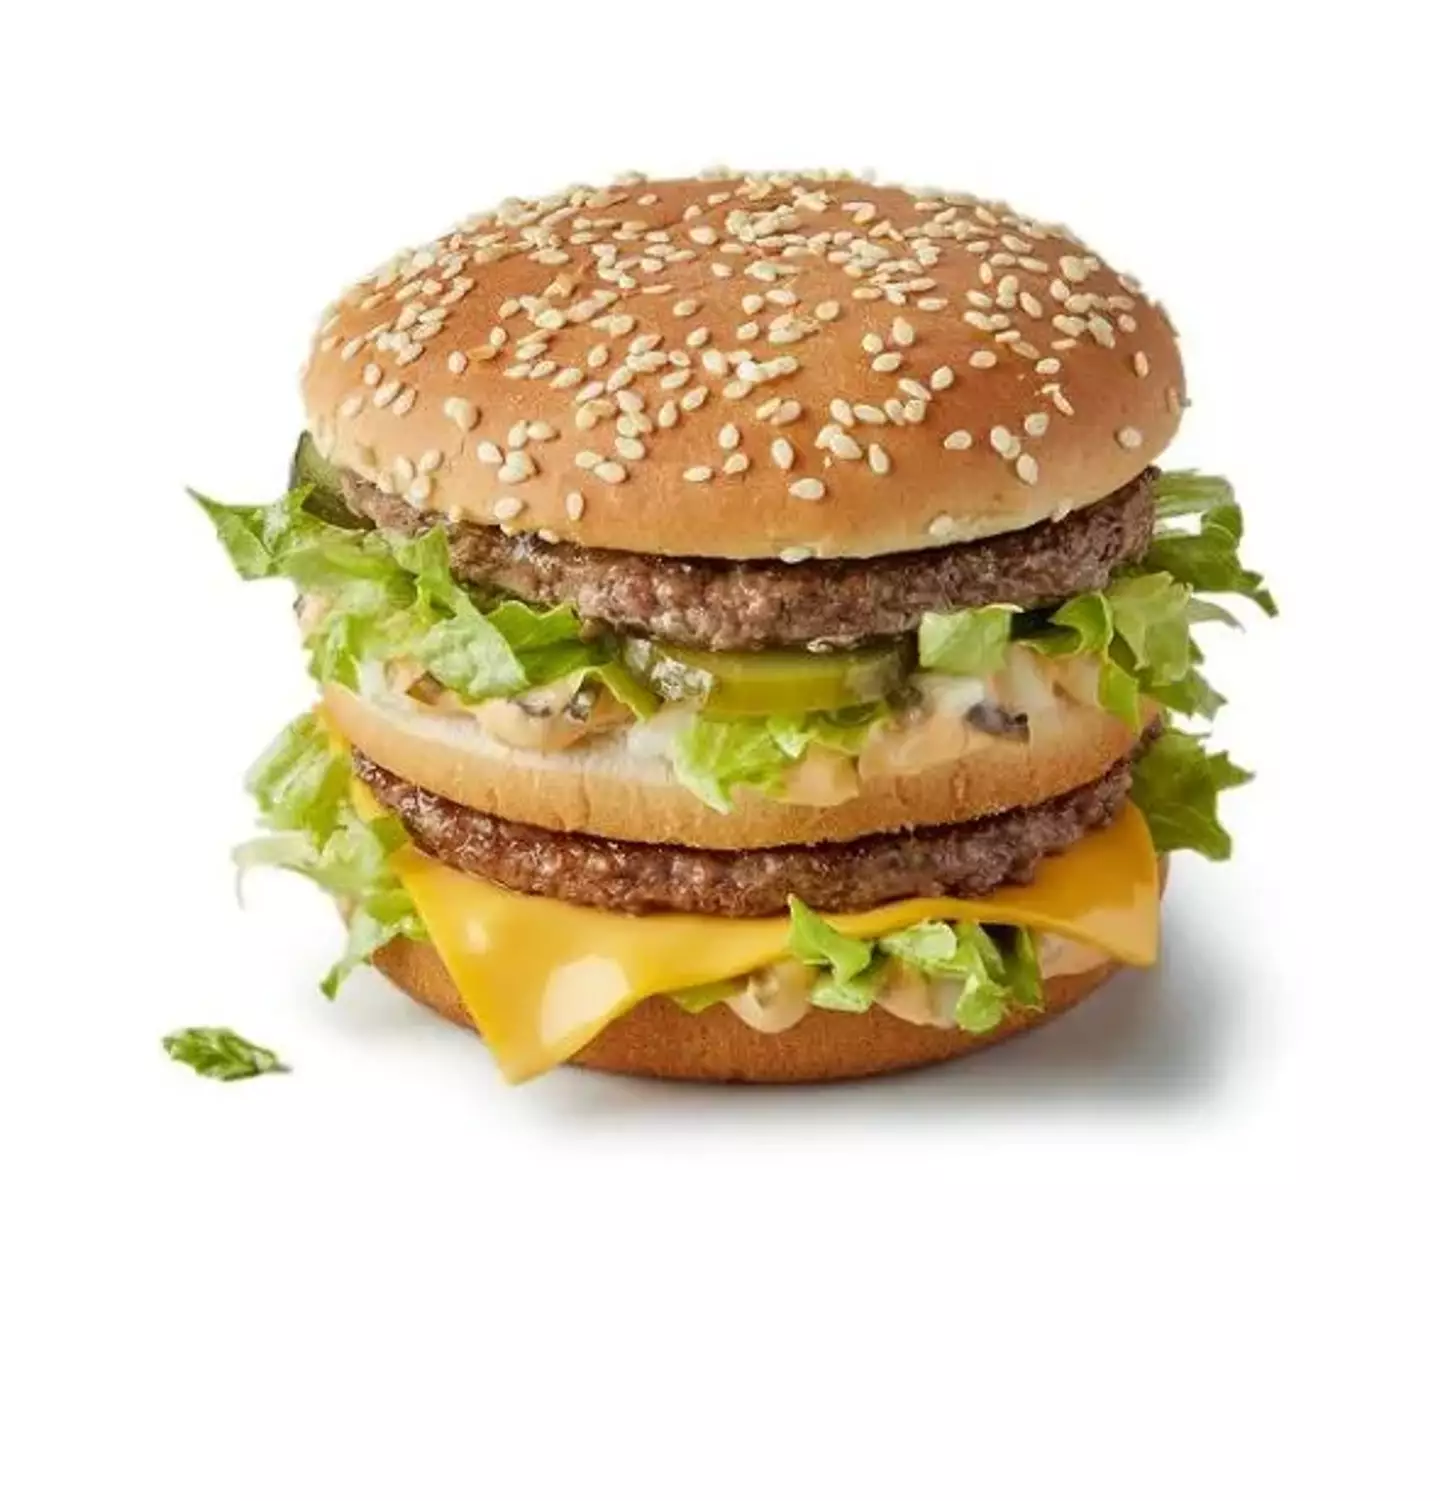 The famous Big Mac, though someone launched a lawsuit claiming it didn't look like this.